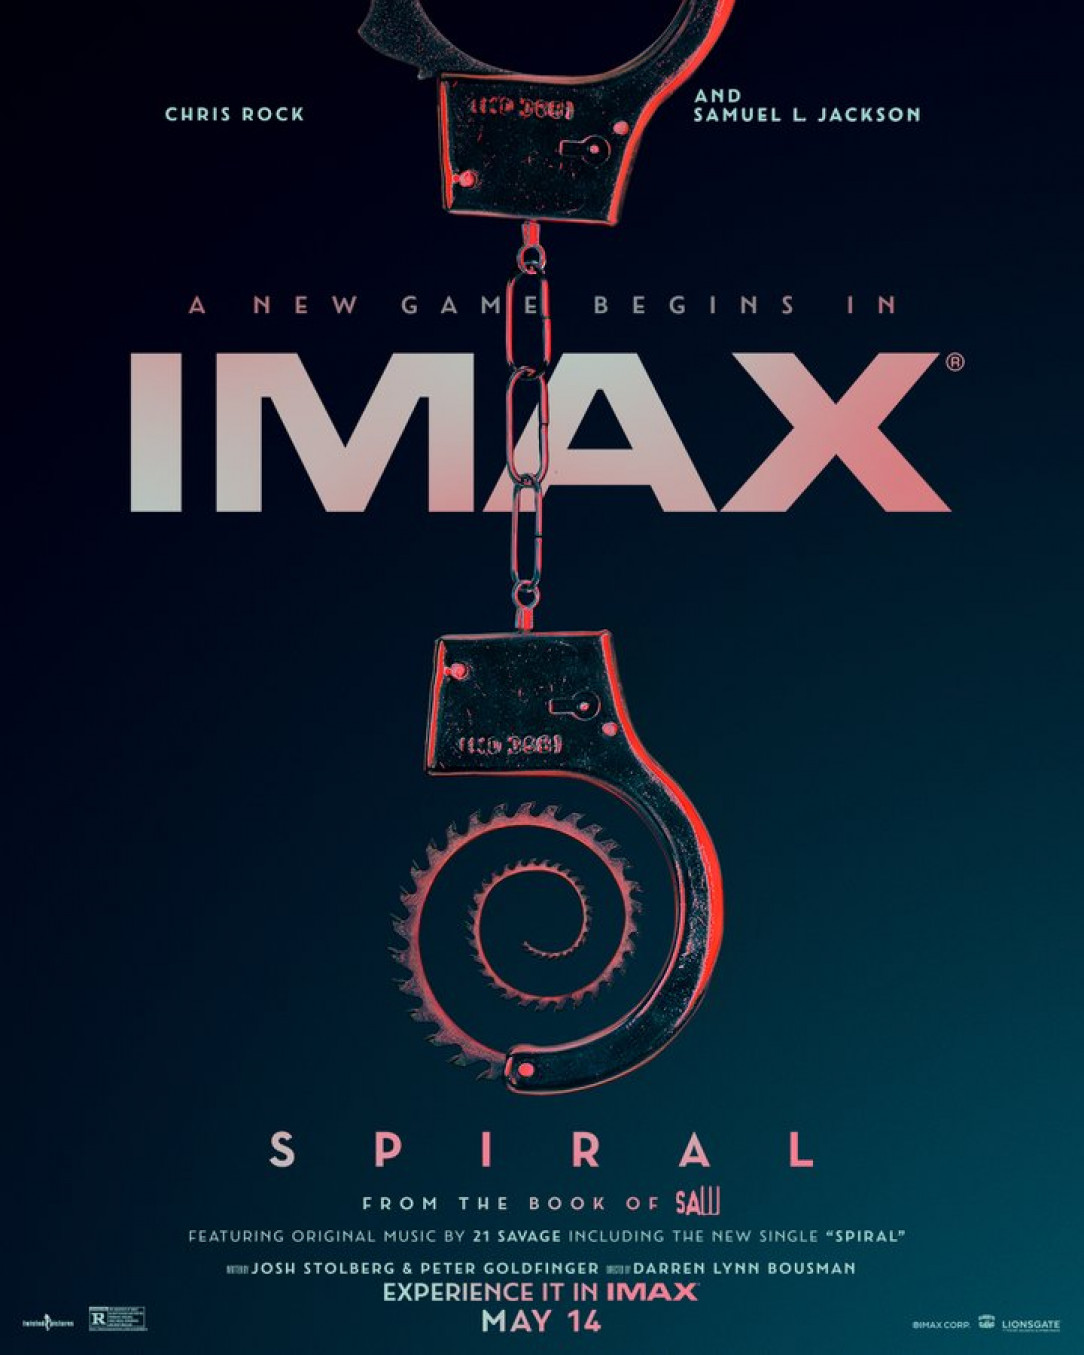 New IMAX poster for &#039;Spiral: from the book of saw&#039; - starring Chris Rock and Samuel L. Jackson